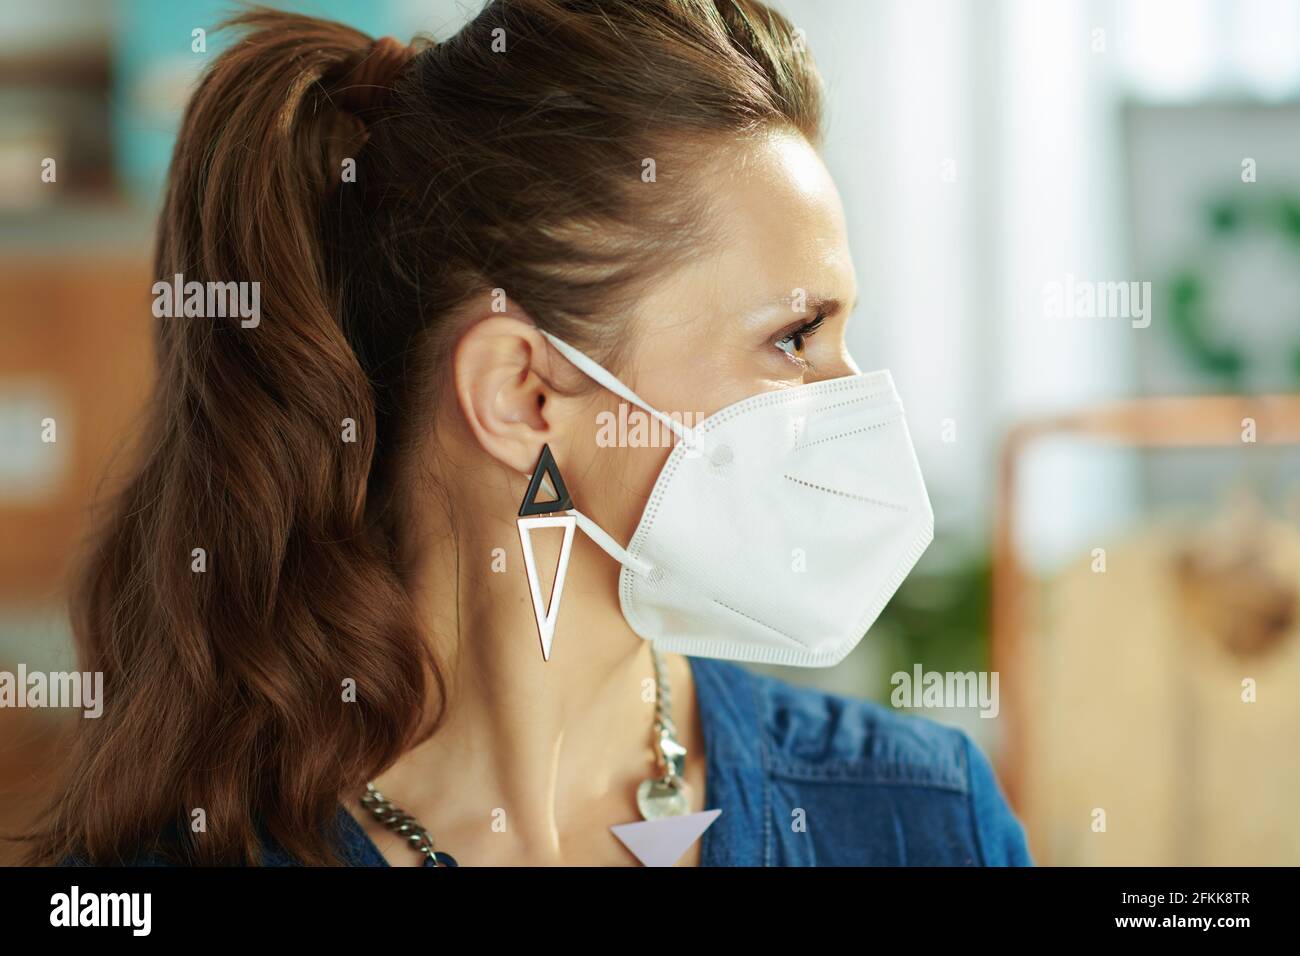 trendy 40 years old small business owner woman with ffp2 mask in the office. Stock Photo